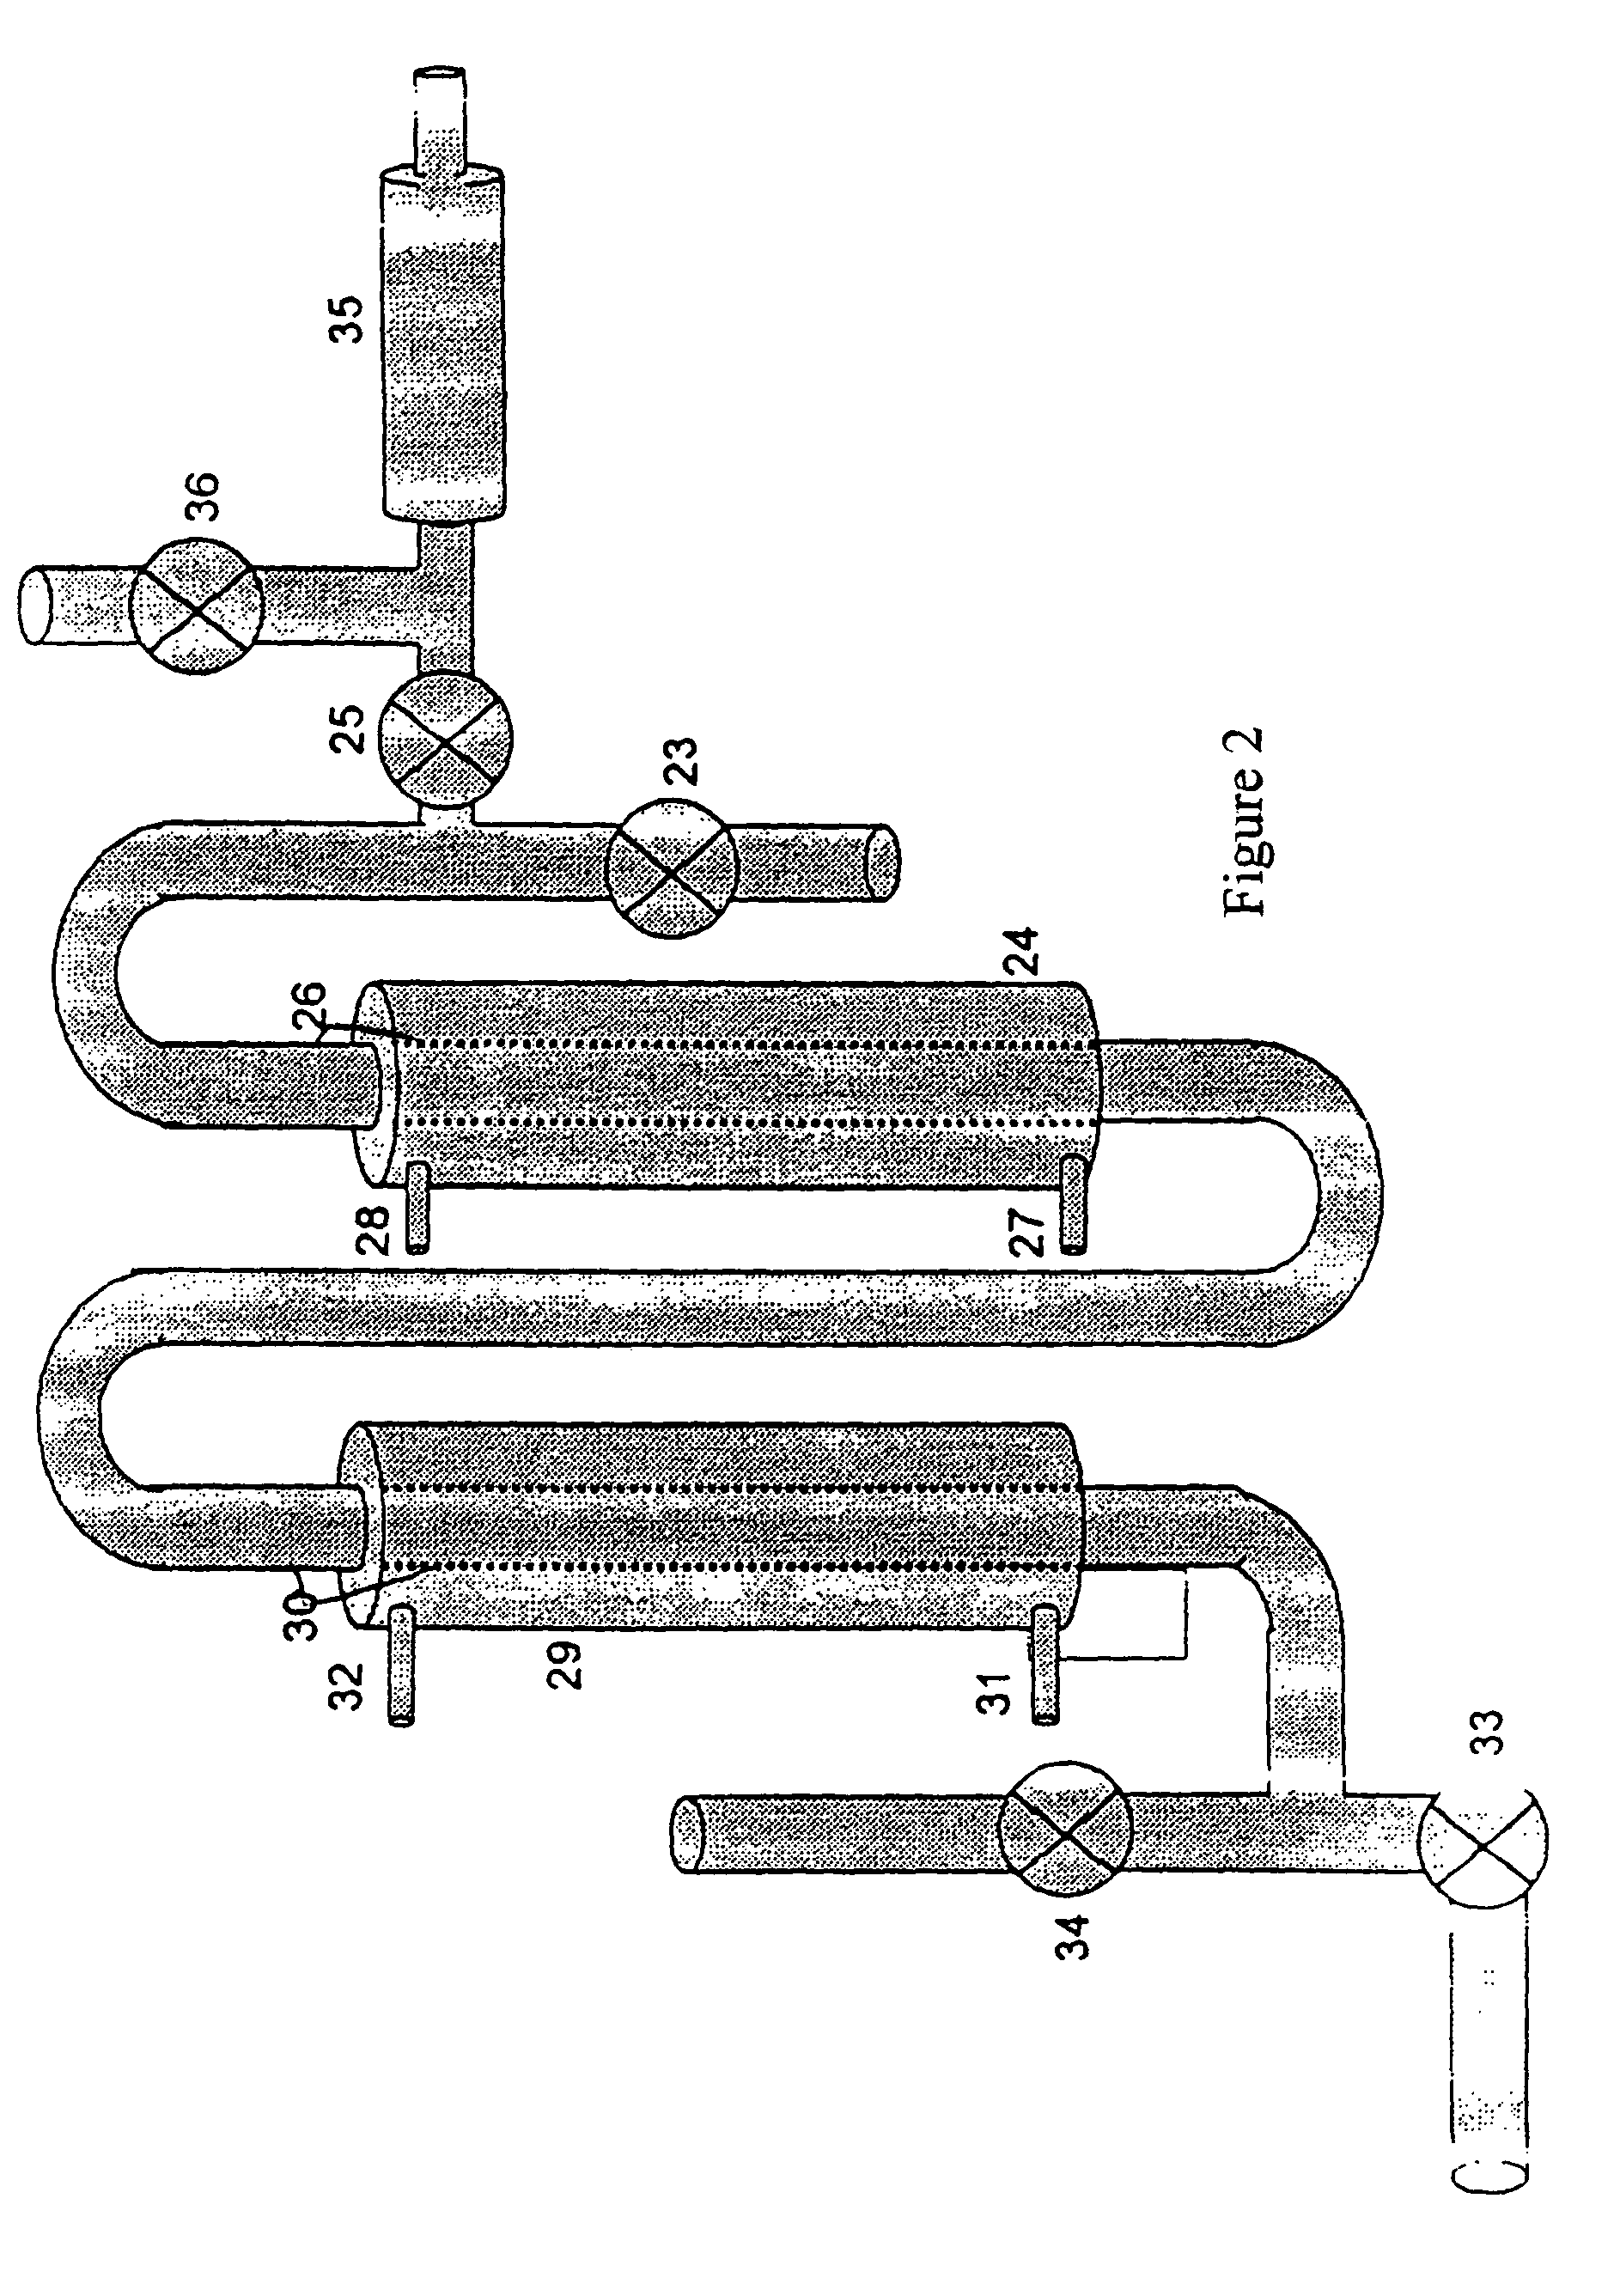 Apparatus and methods for use in concentration of gas and particle-laden gas flows